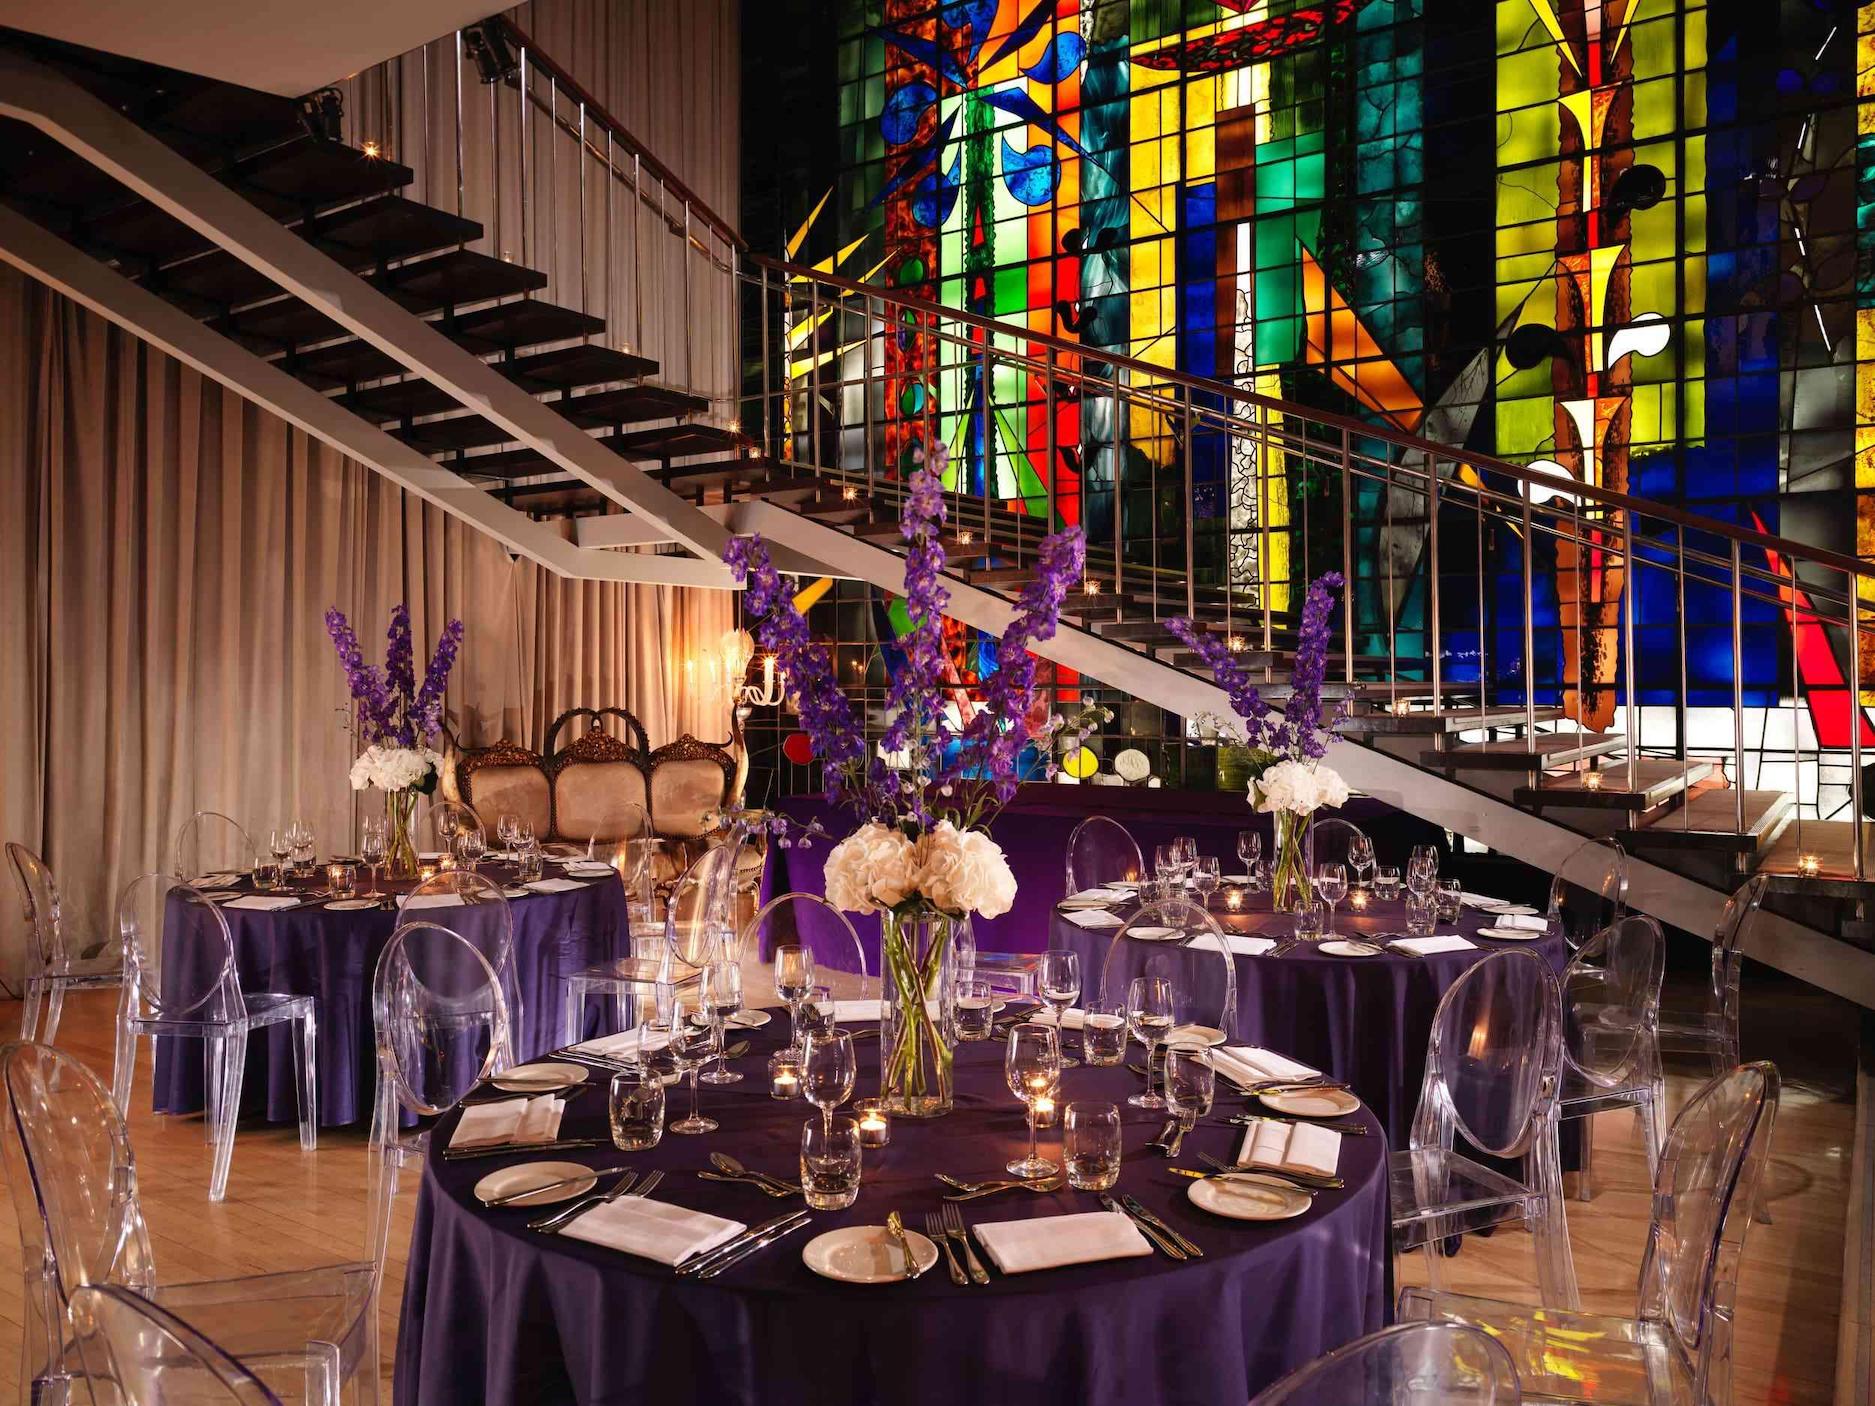 Large room with glass stained windows and round tables with purple tablecloths and large bouquet centerpieces